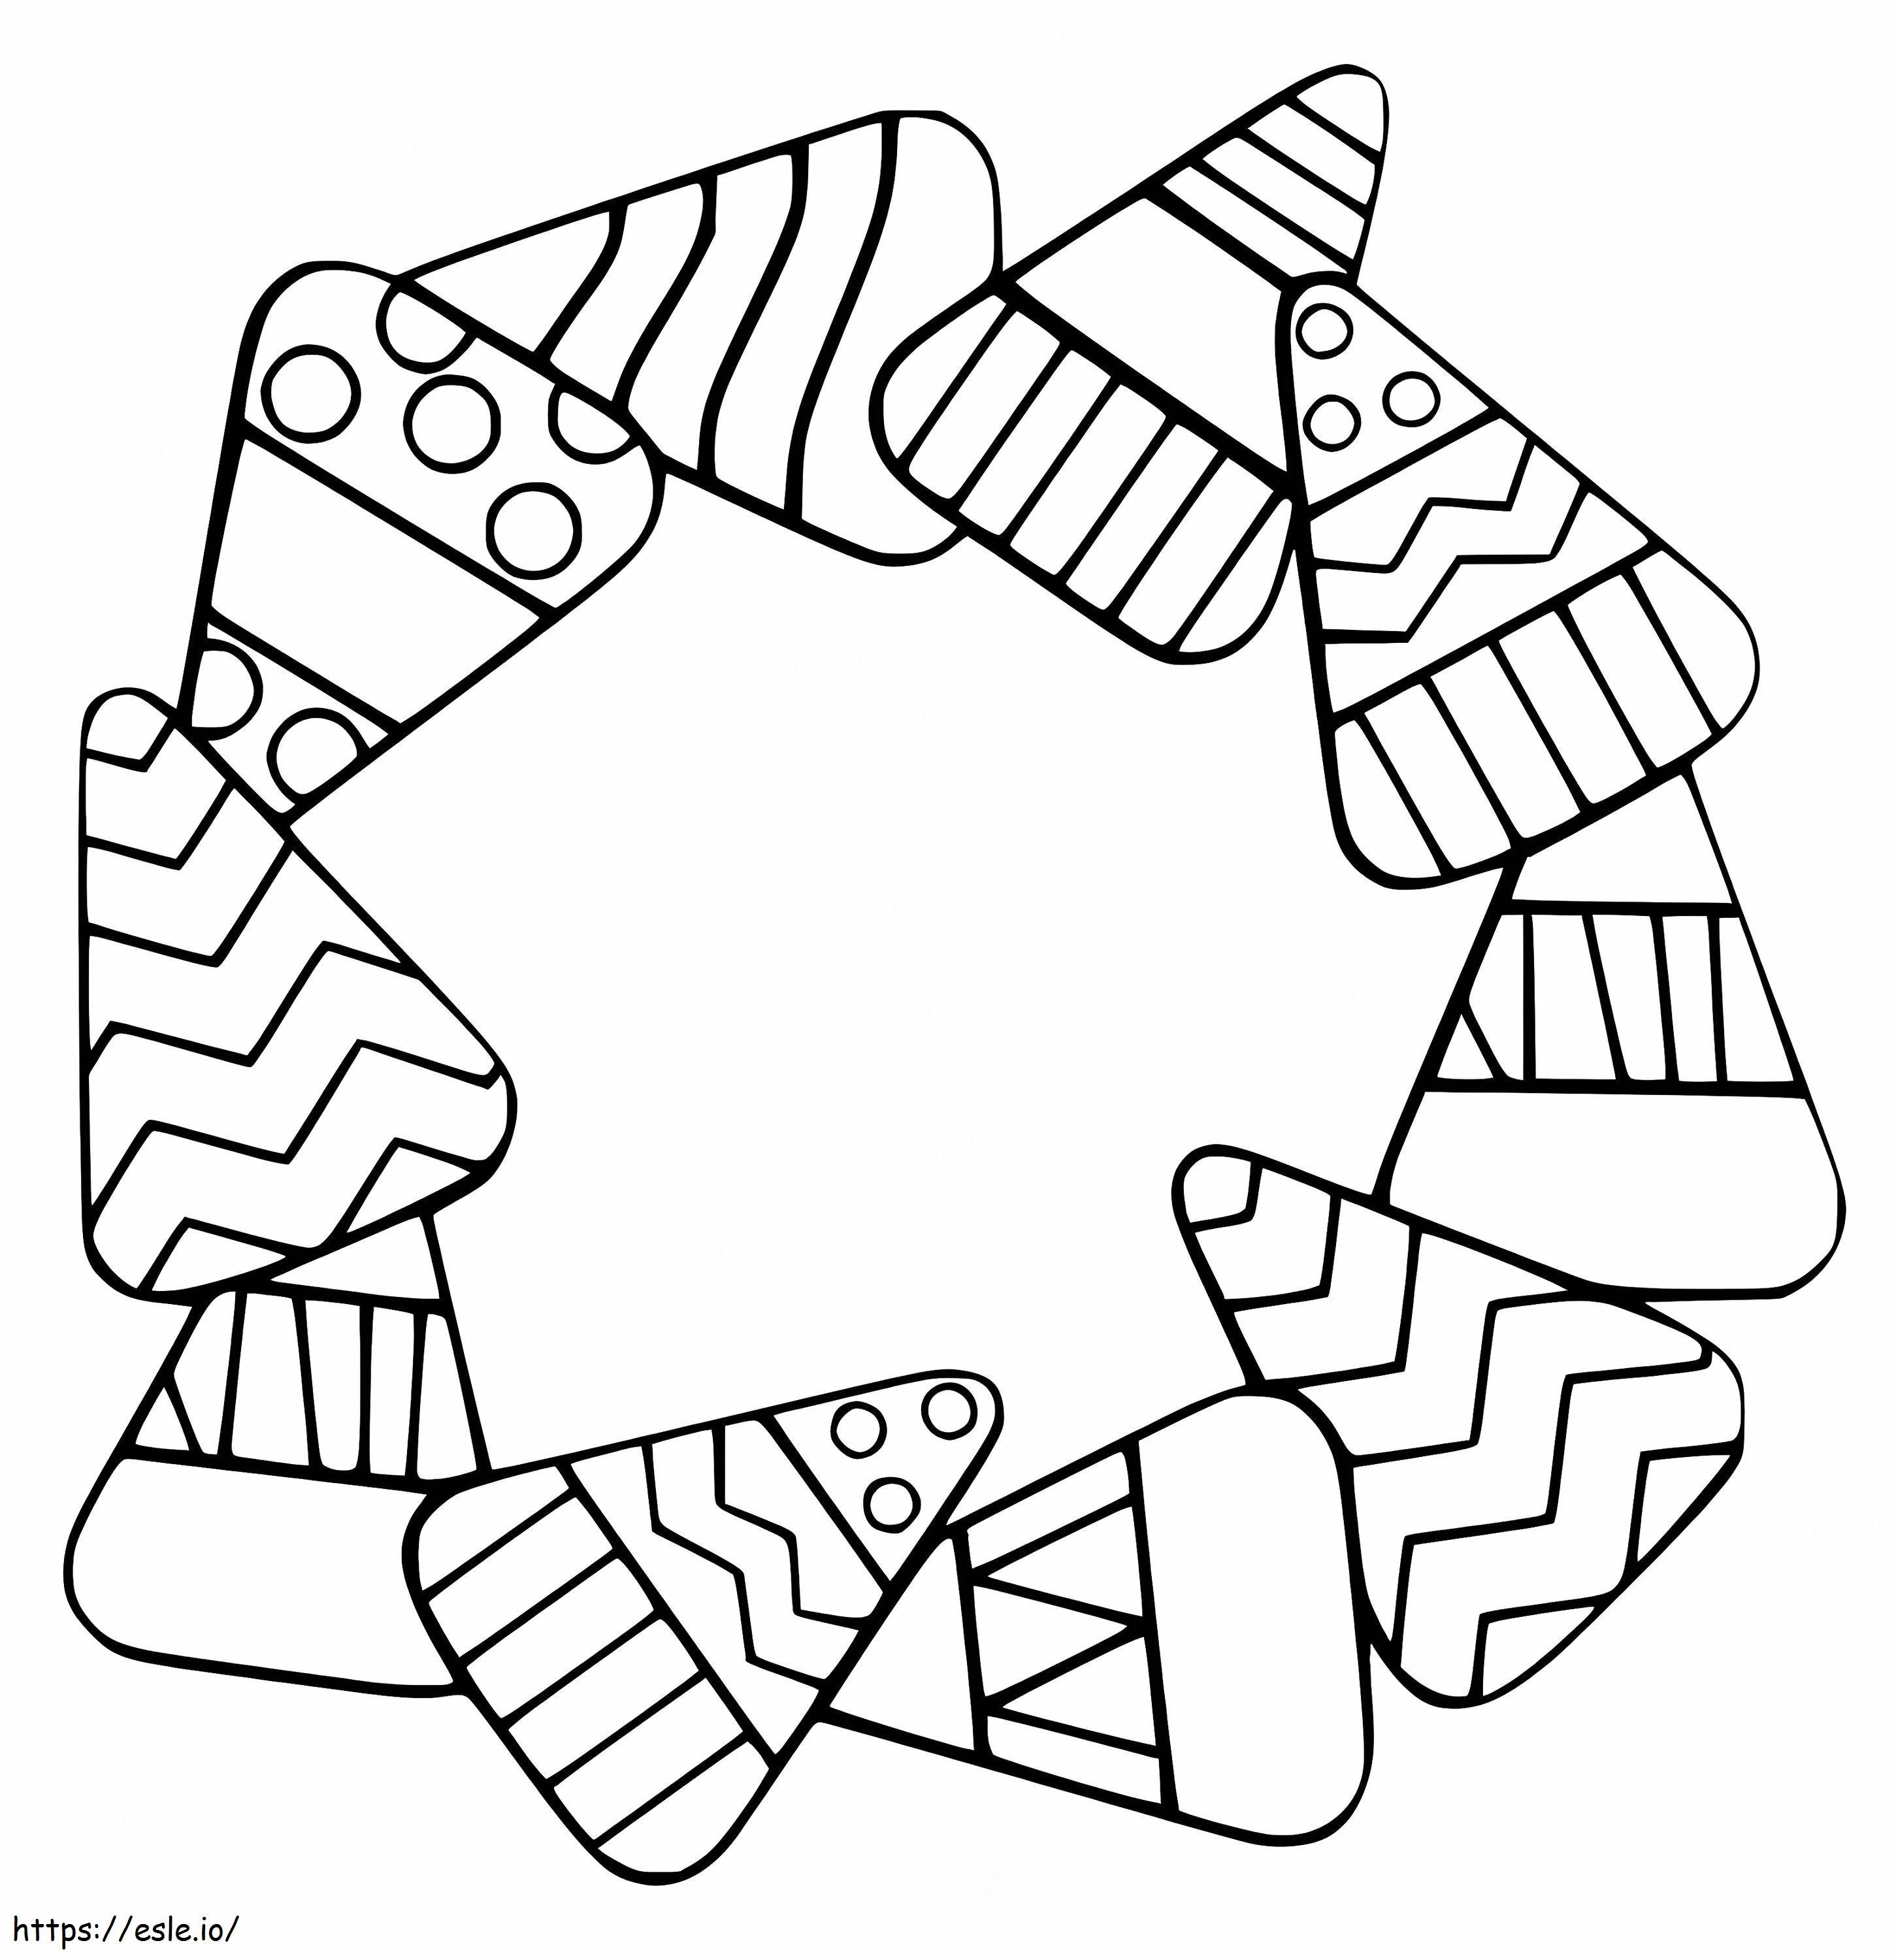 Candy Corn Wreath coloring page